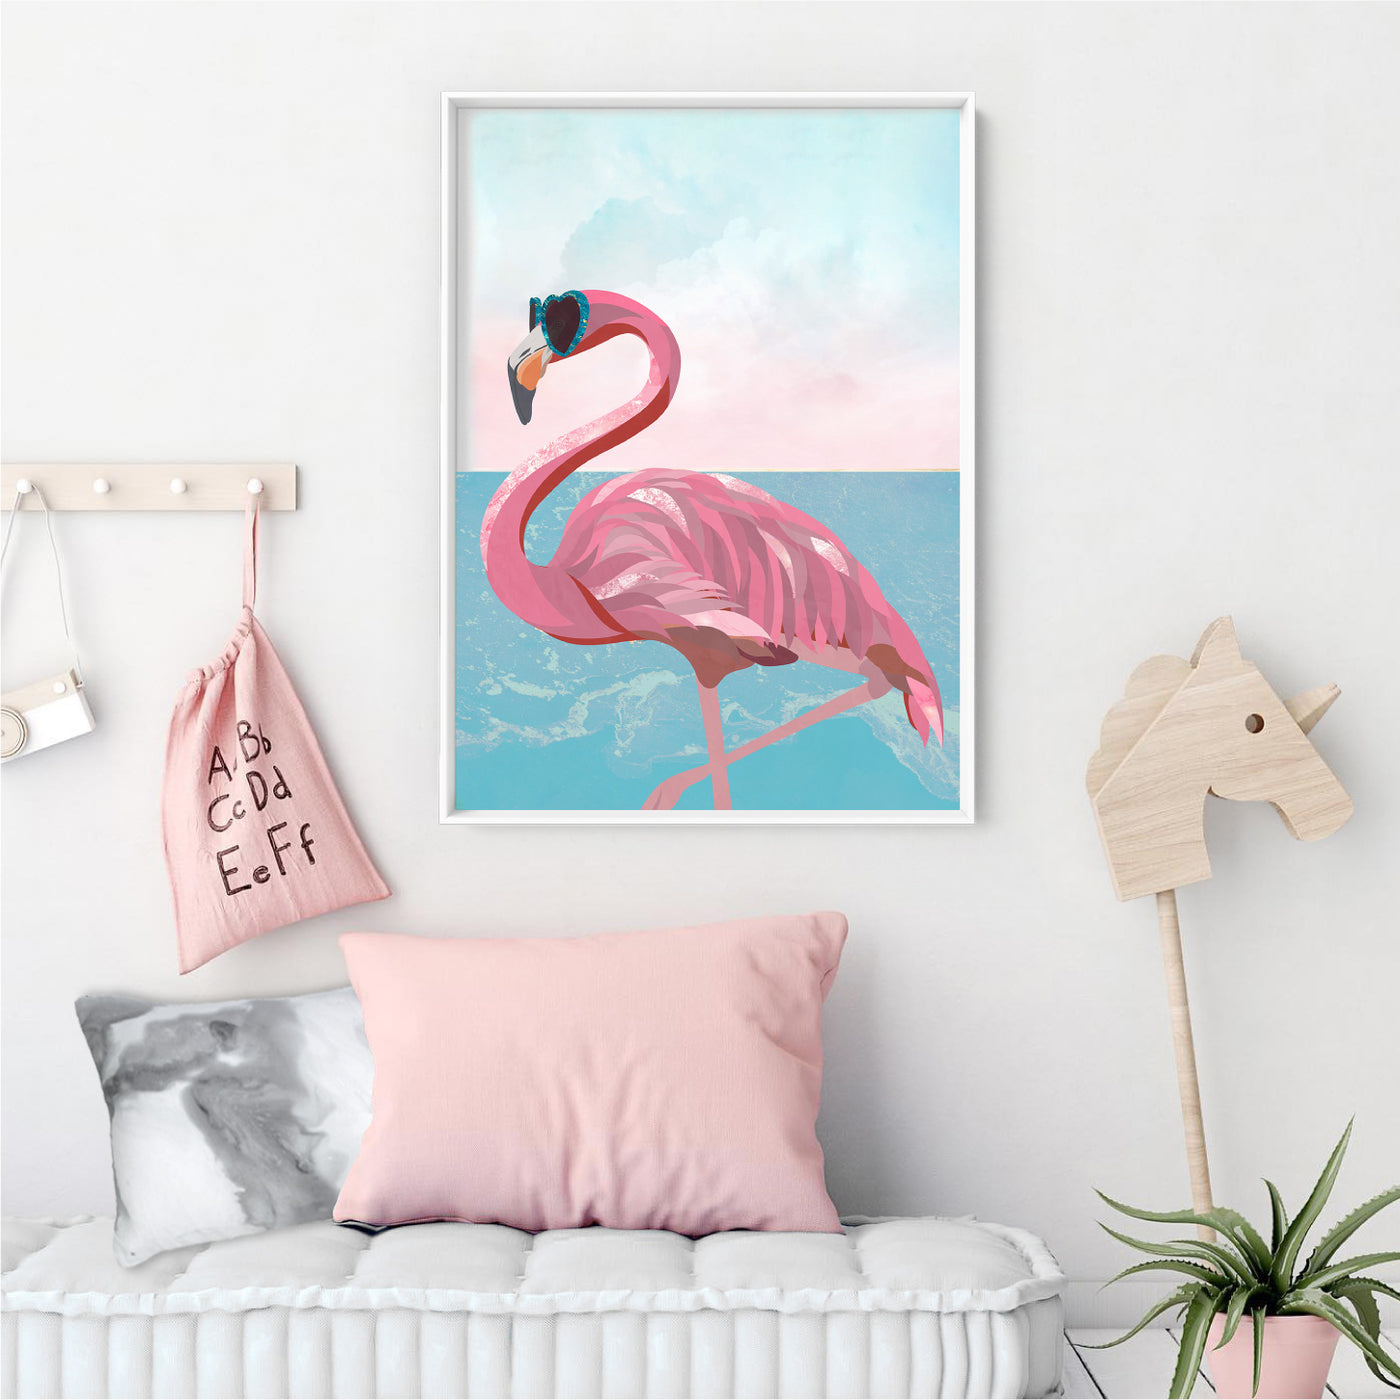 Flamingo Pop - Art Print, Poster, Stretched Canvas or Framed Wall Art Prints, shown framed in a room